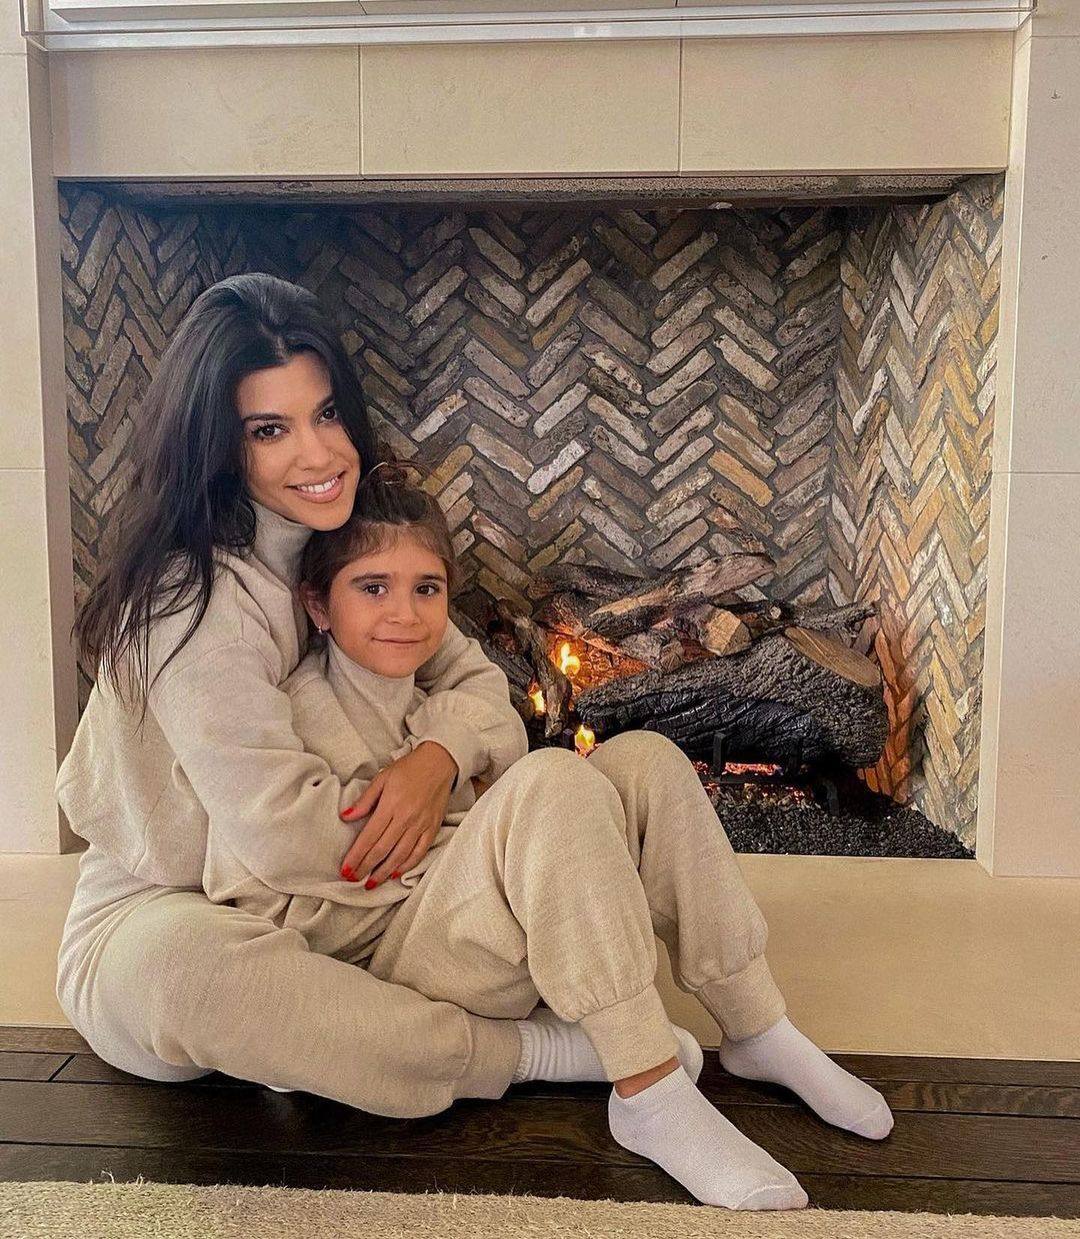 Kourtney Kardashian has called her daughter Penelope Disick her “muse” and even named her company after her. Photo: @penelope.scotland_disick/Instagram